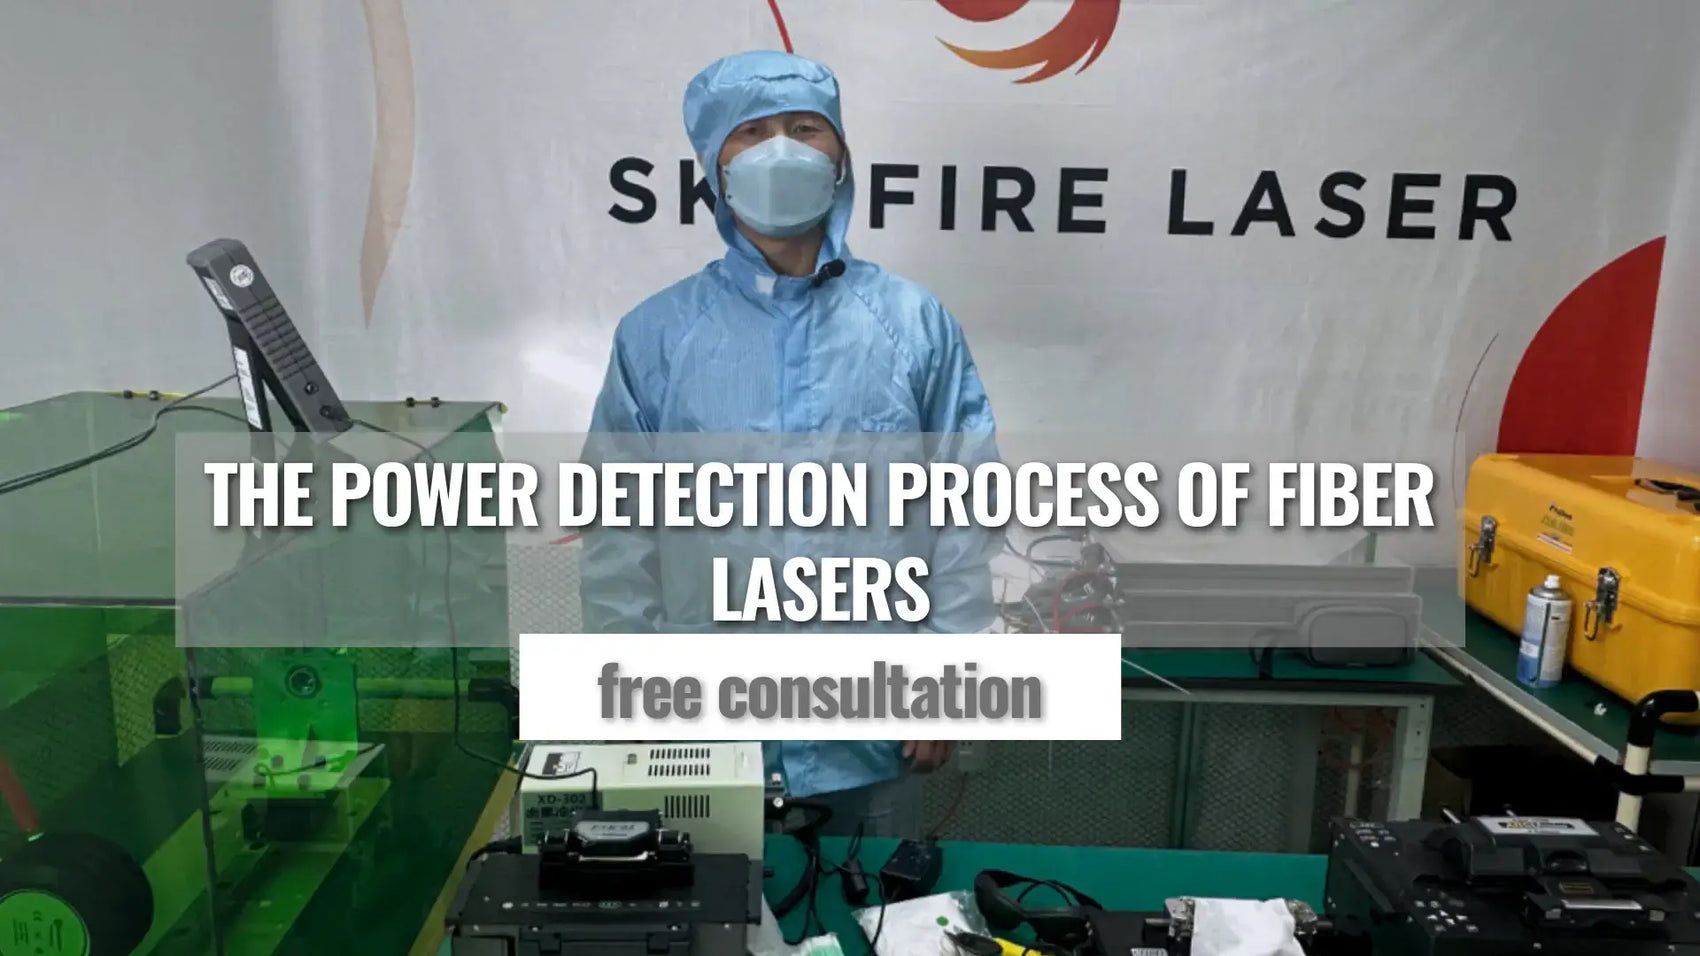 Technician demonstrating power detection process of fiber lasers at Sky Fire Laser lab, offering free consultation.